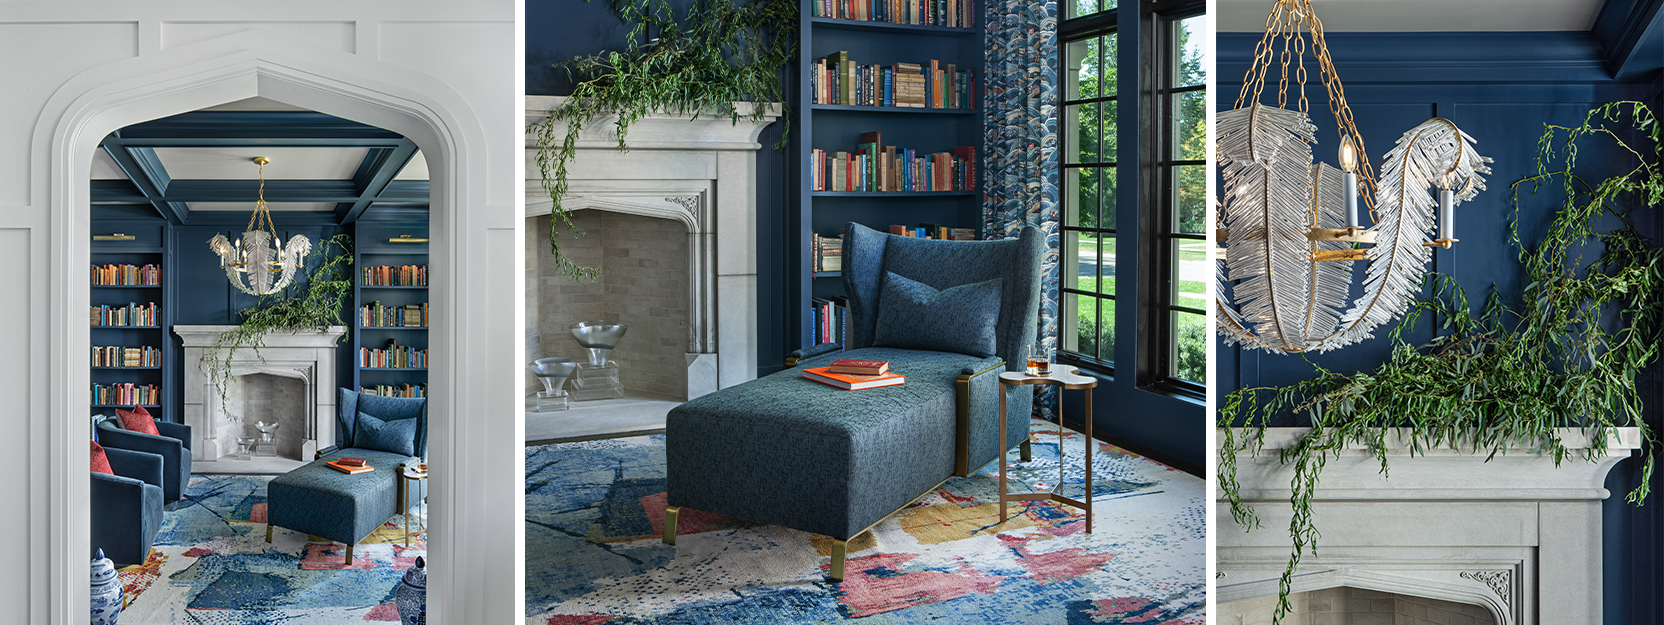 Detail shots of white molding on archway leading into blue coffer-ceilinged home library with modern wing-backed chaise lounge, gray painted fireplace, and chandelier with feather motifs.